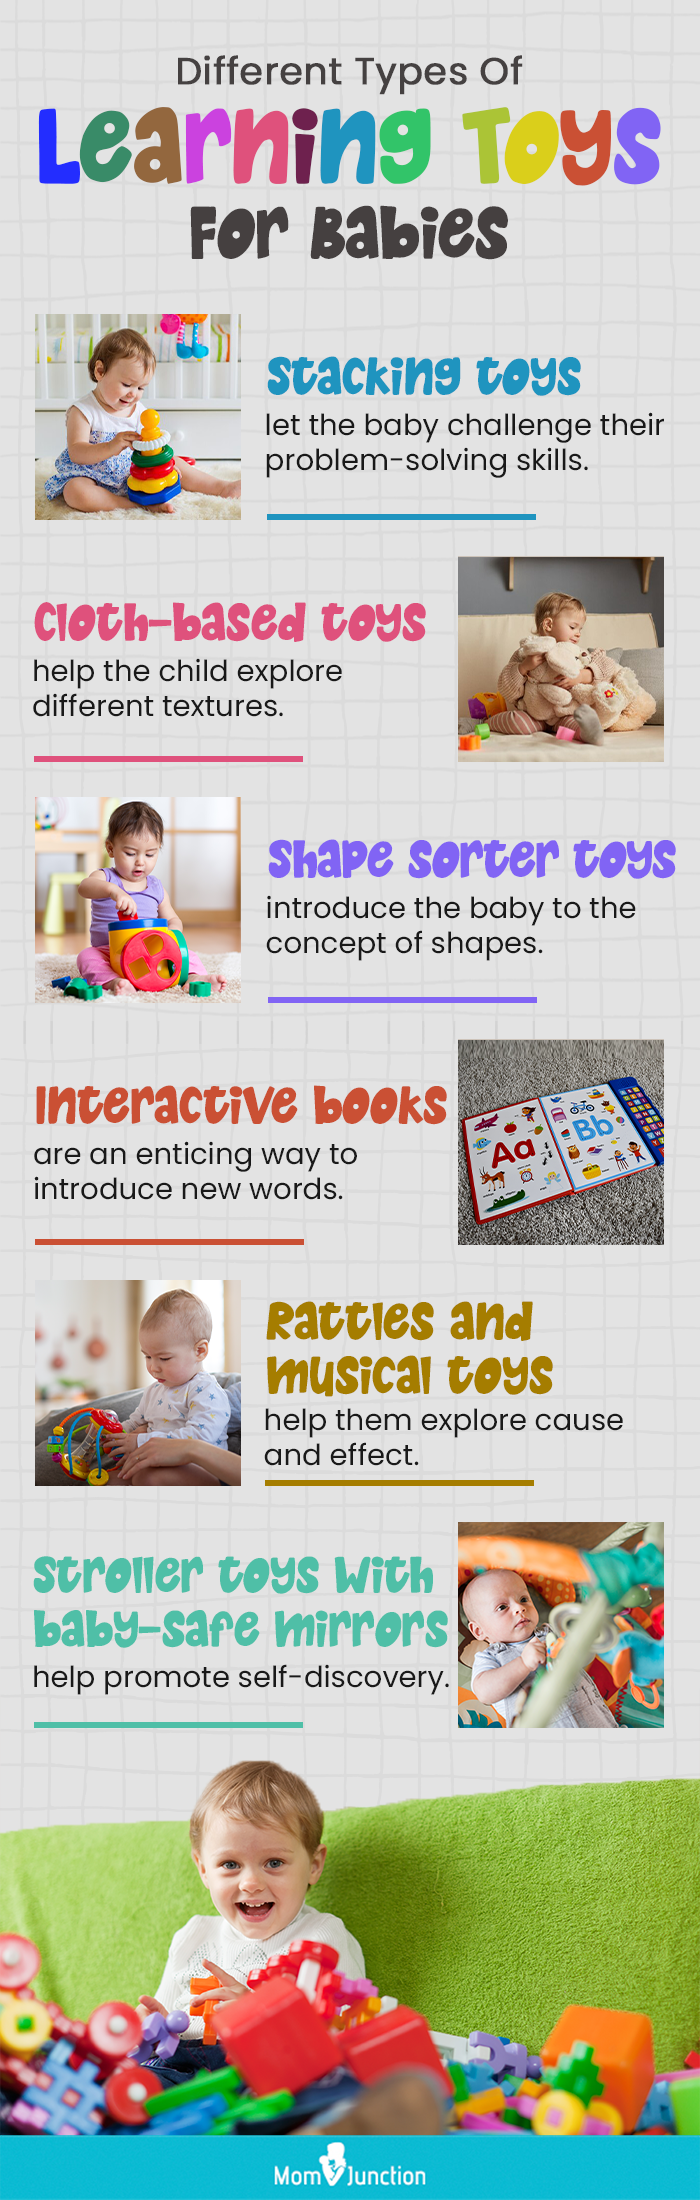 Different Types Of Learning Toys For Babies (infographic)